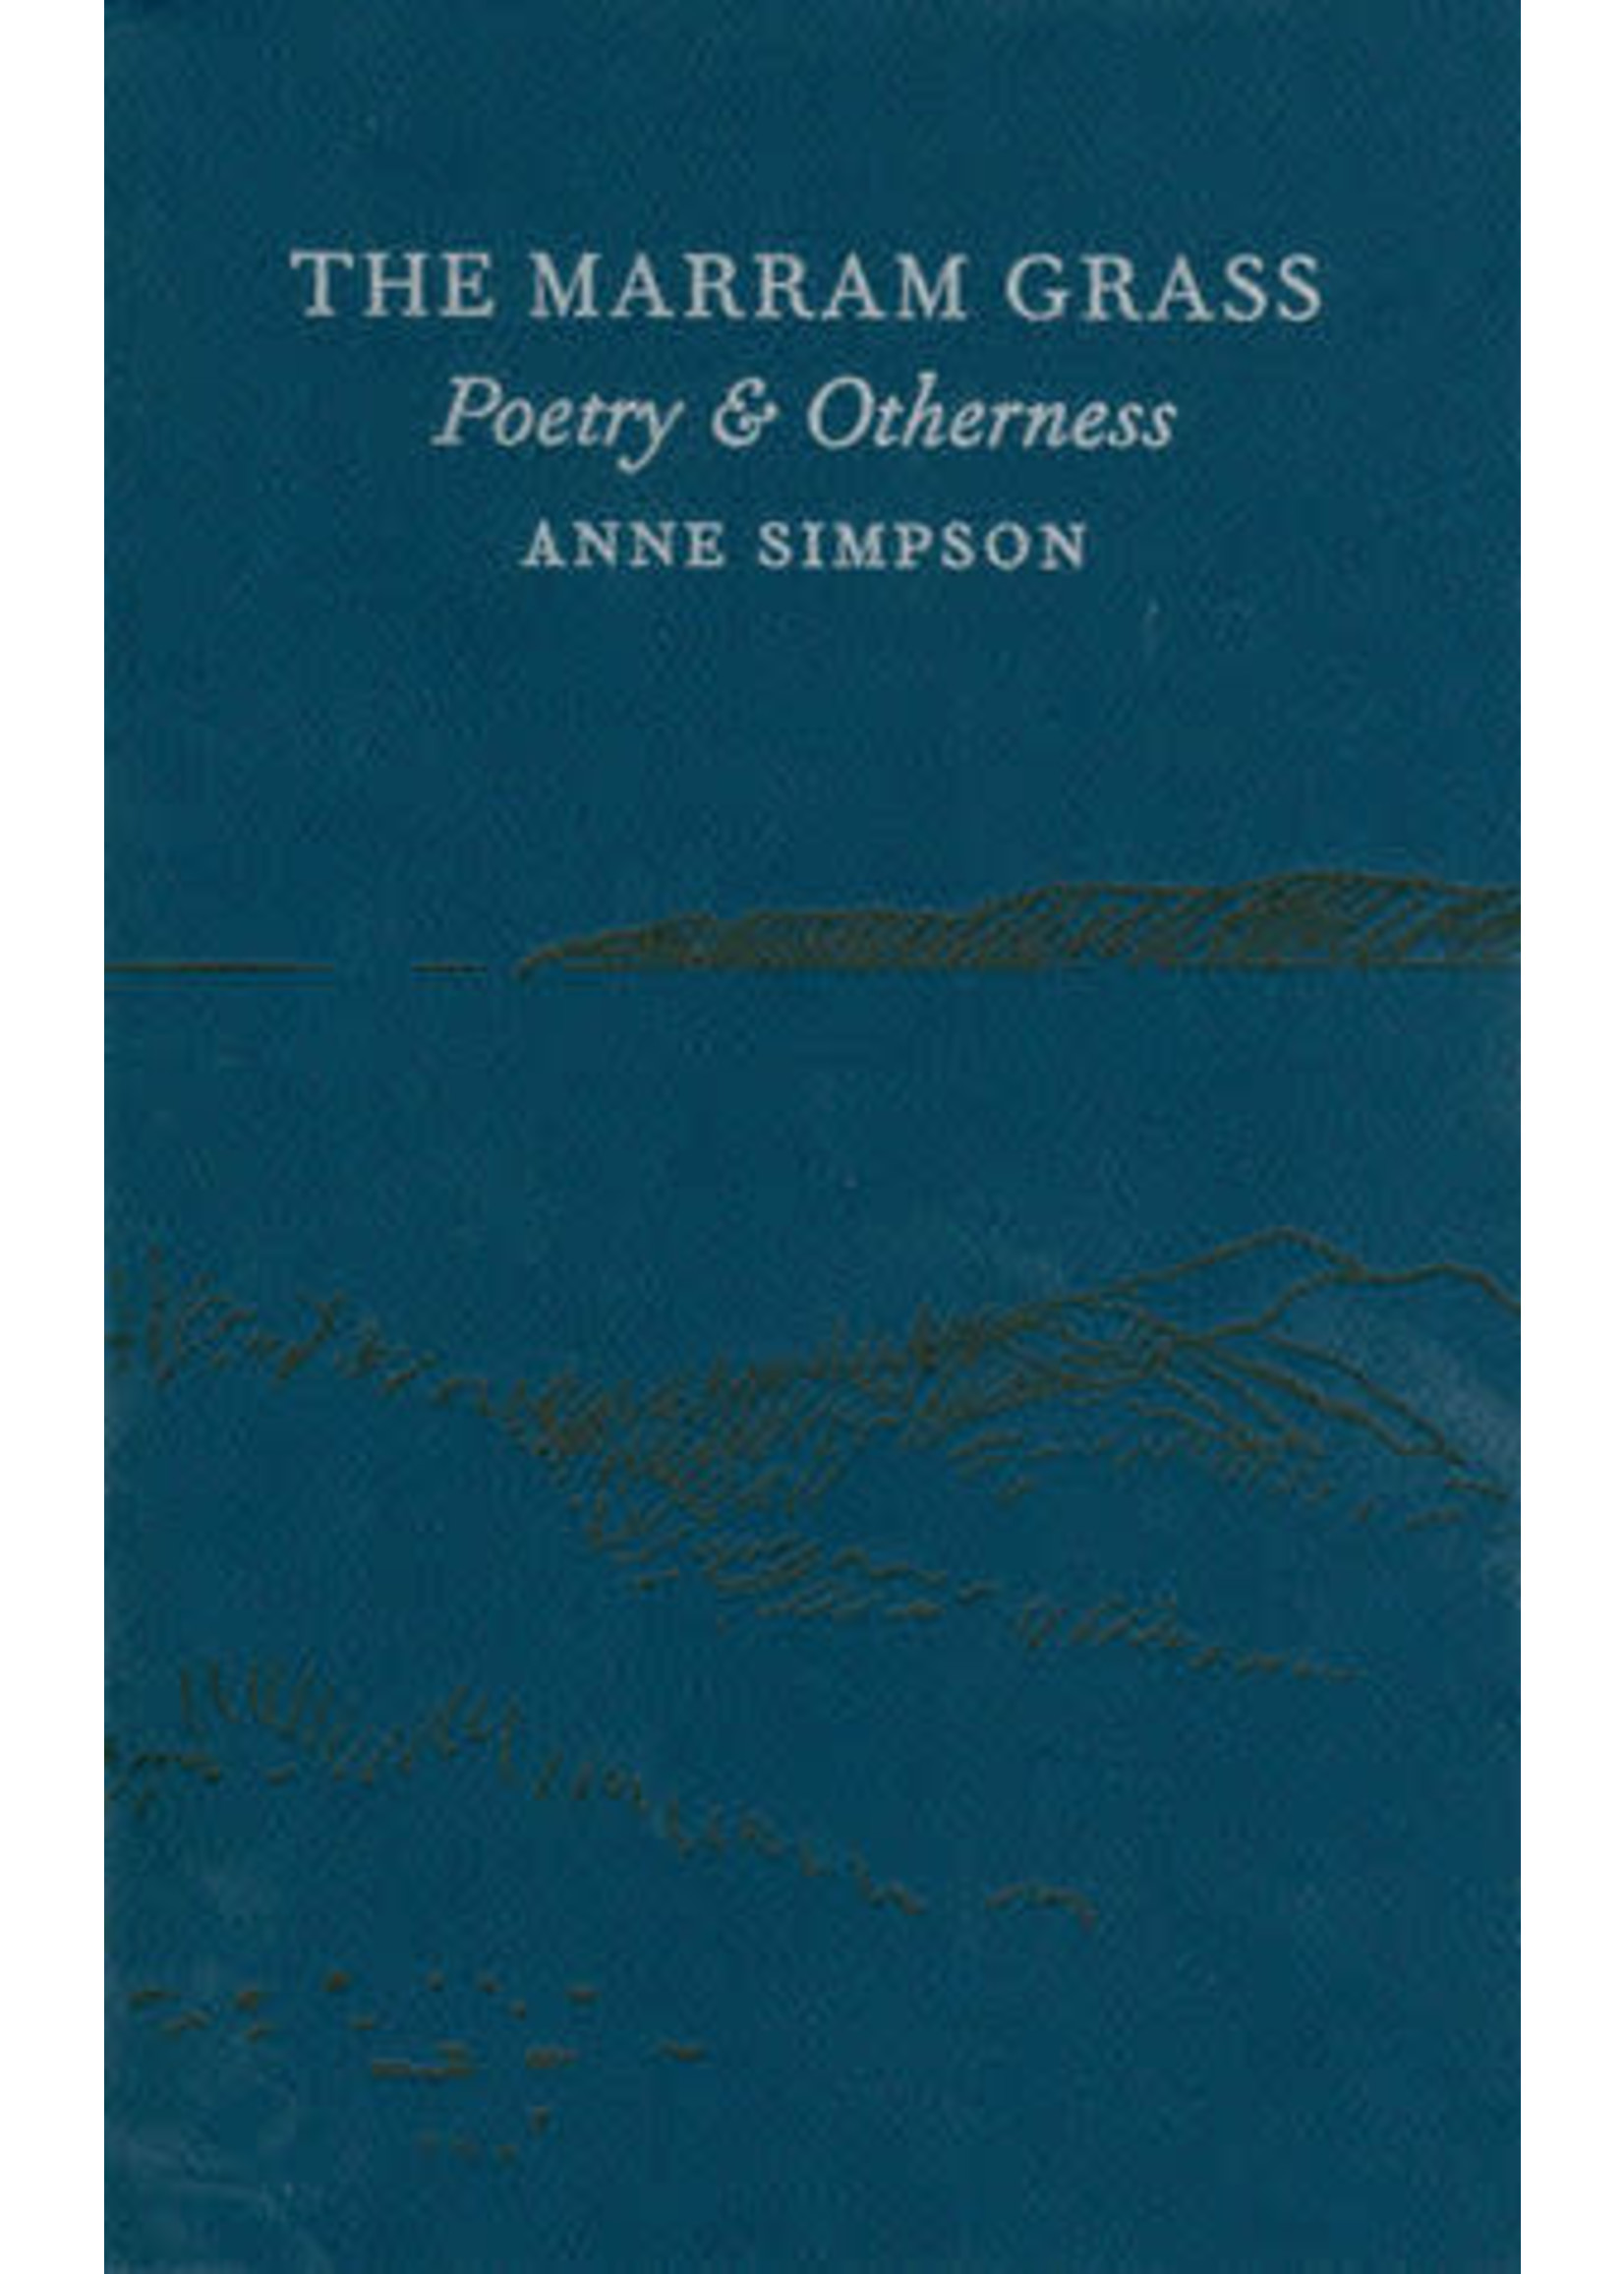 The Marram Grass: Poetry & Otherness by Anne Simpson